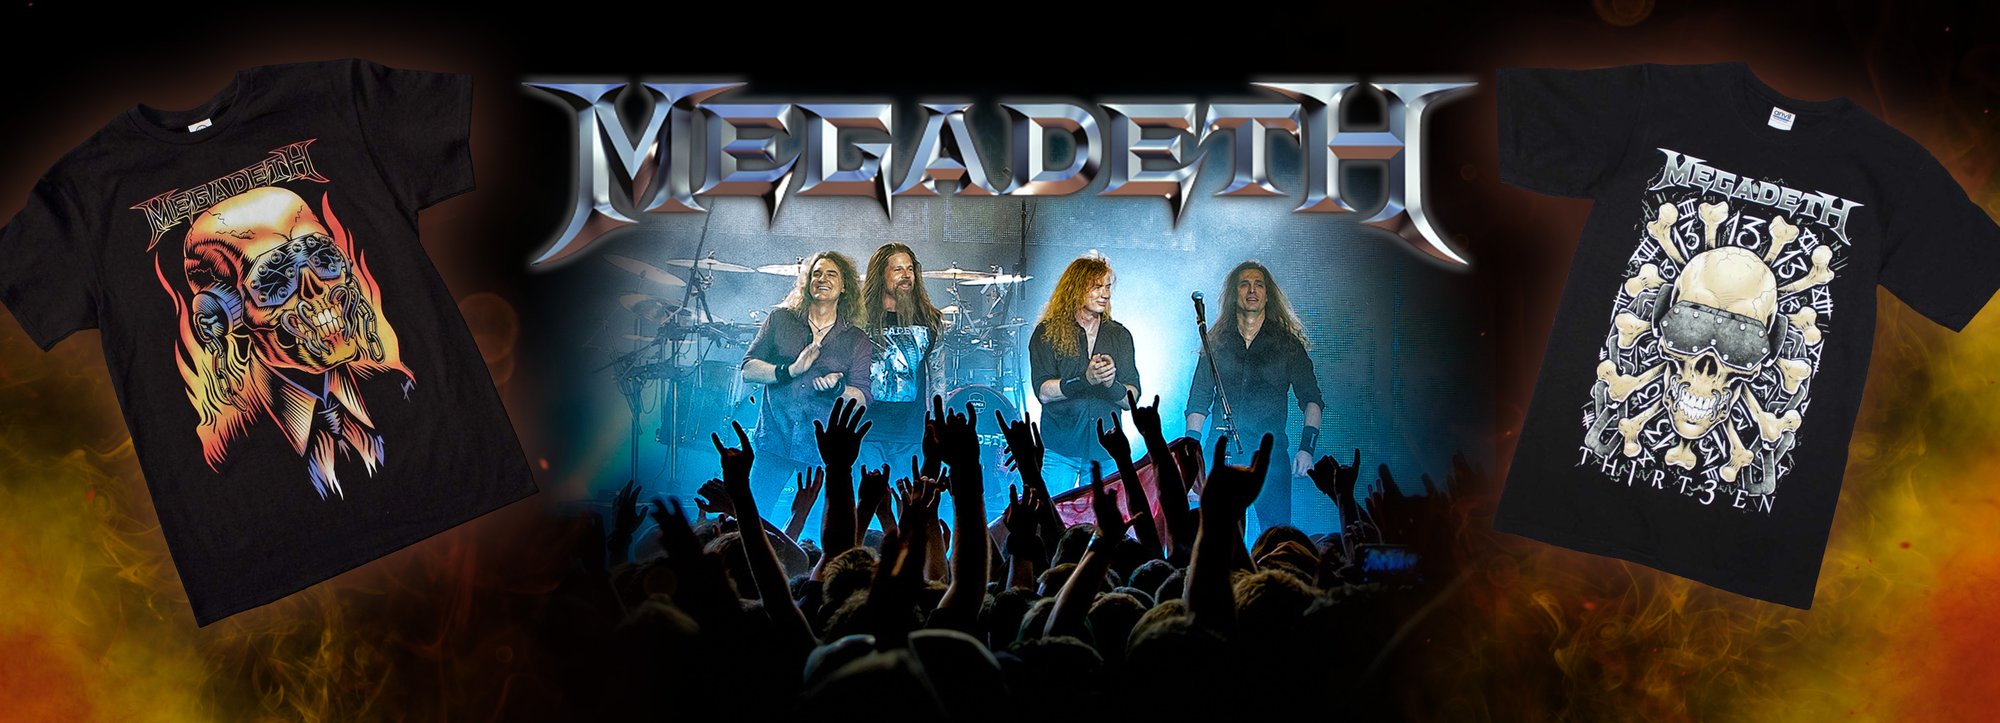 Officially licensed Megadeth t-shirts